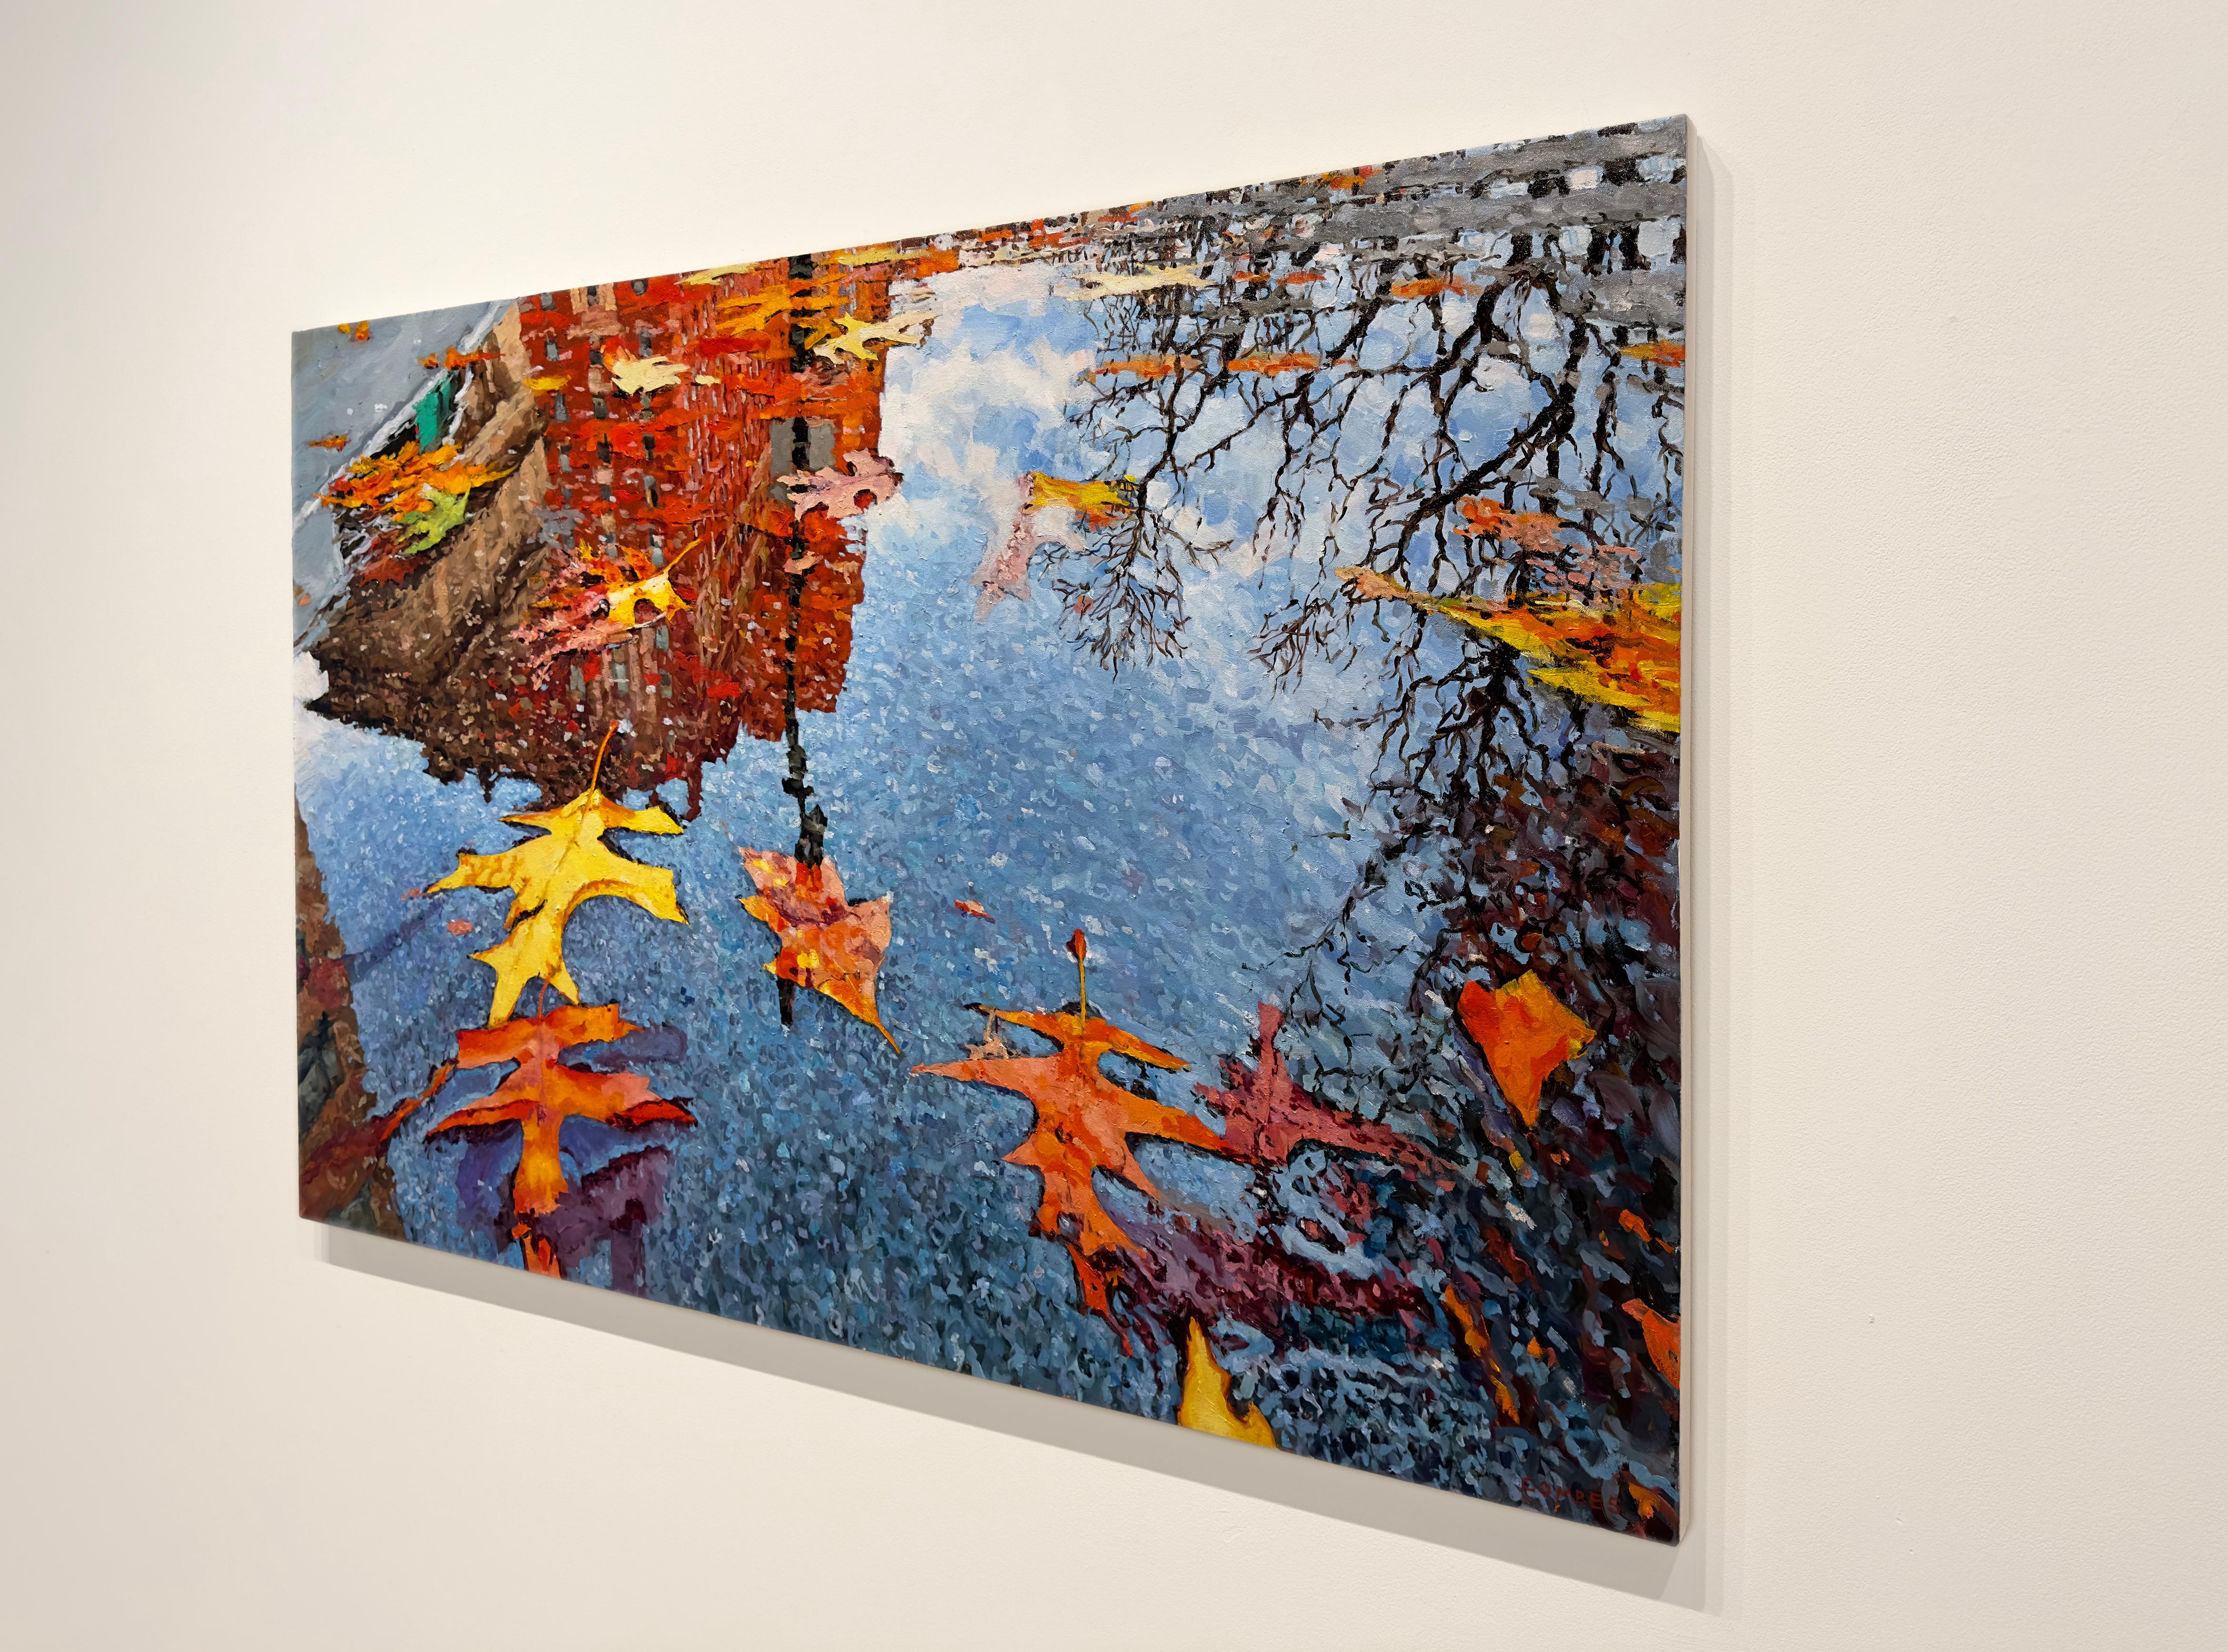 FALL REFLECTION CENTRAL PARK - Realism / Cityscape / Autumn  - Contemporary Painting by Richard Combes